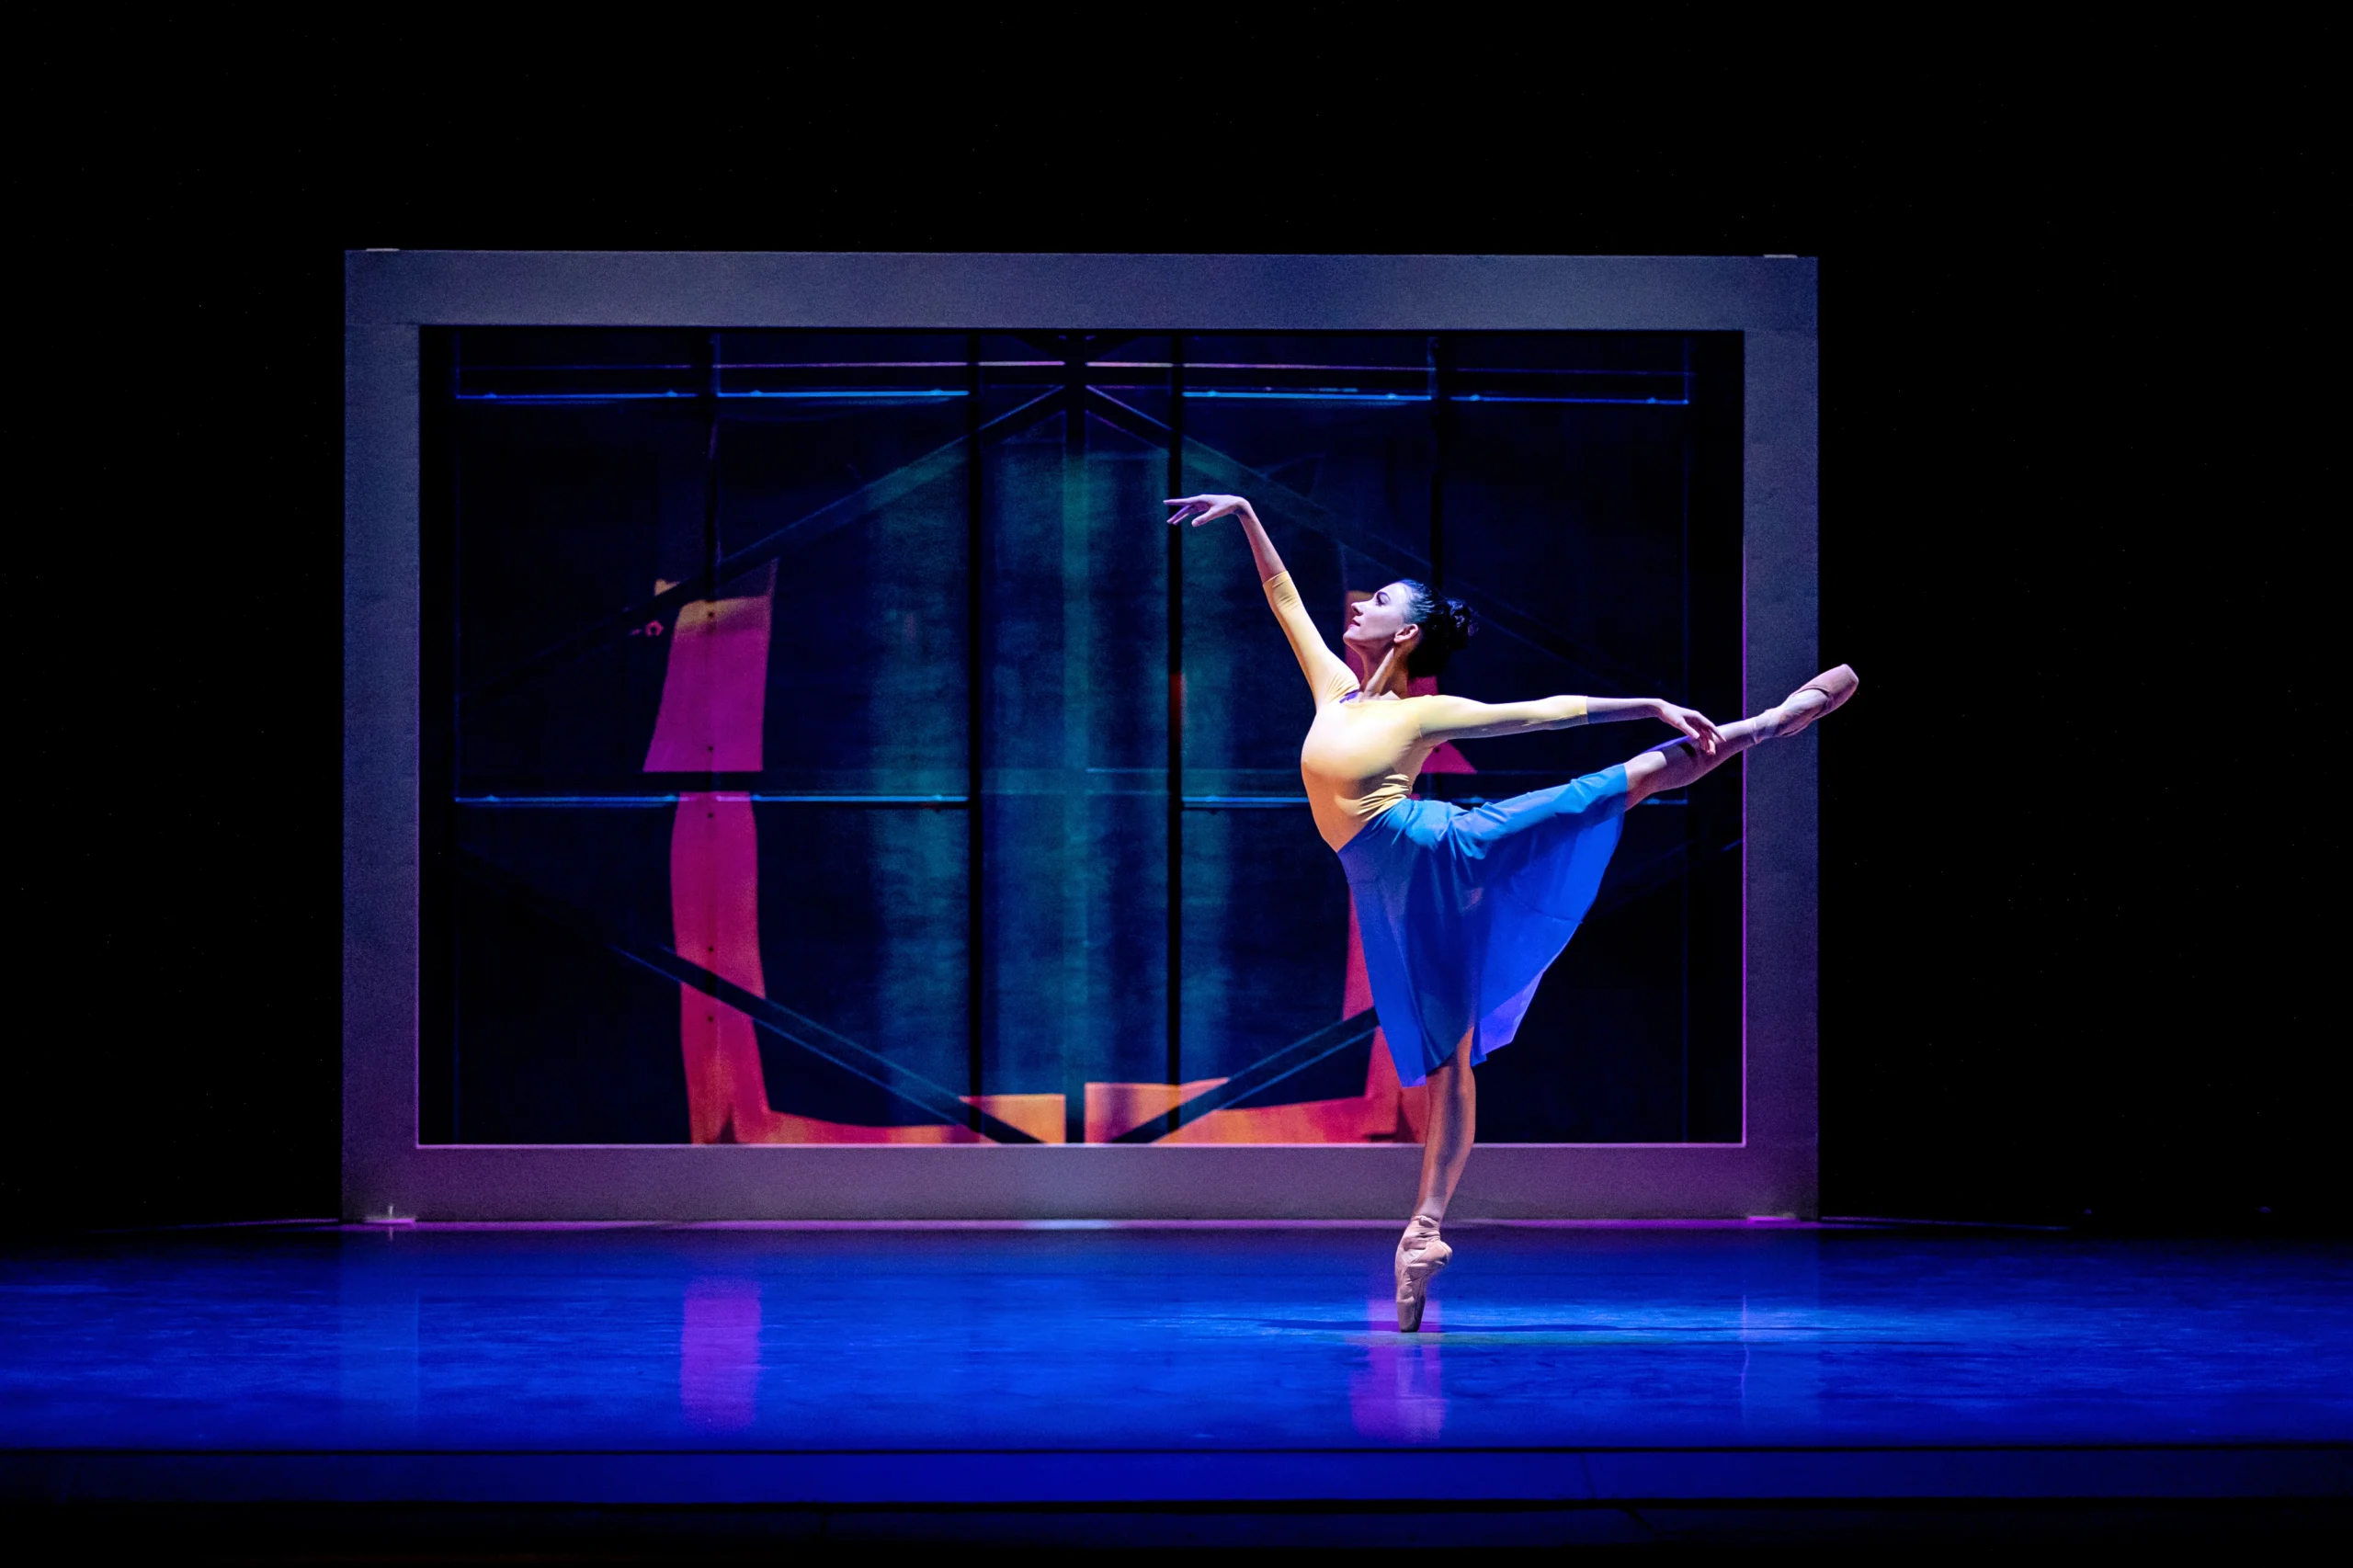 During a performance, Jasmine Jimison performs a piqué in first arabesque on pointe towards stage right. She wears a yellow long-sleeved top and bright blue skirt, and dances in front of a large, framed multicolored image.